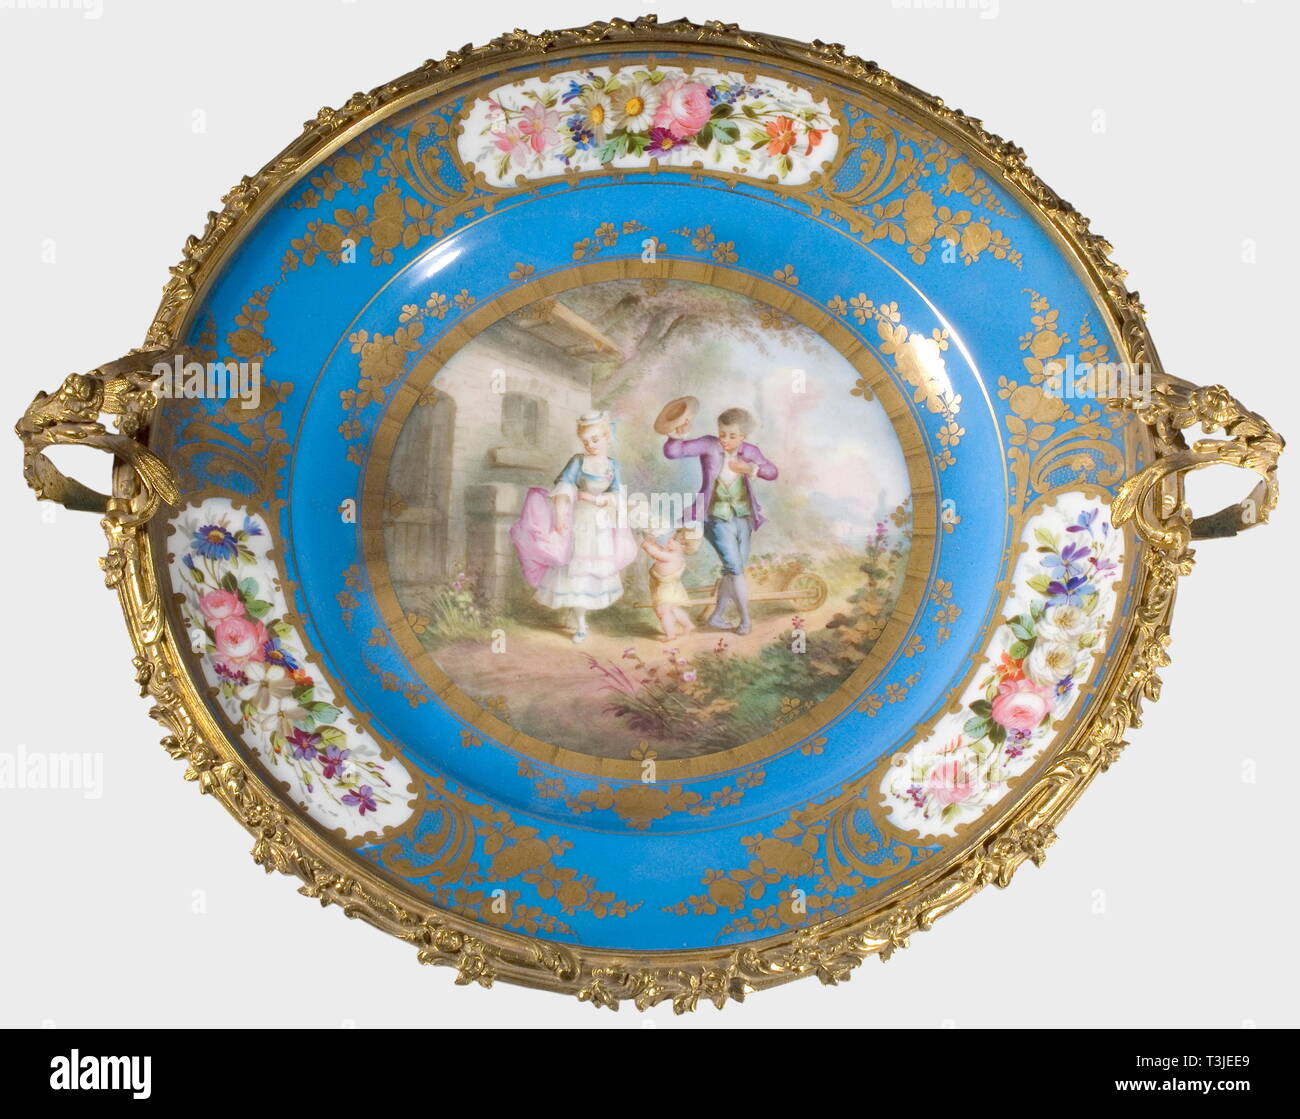 A large porcelain dish, Sèvres Factory, 19th century Sèvres-blue glazed porcelain with a hand-painted lovers' scene in the centre, the border has gilt and etched leafy vines and three cartouches with hand painted floral decoration. A reverse 'S' mark in underglaze blue on the bottom. Openwork support of gilt bronze with grape and grape leaf decoration on the four footed frame as well as floral garlands on the plate rim and the two handles. Diameter ca. 37 cm. Height ca. 20 cm. At the latest, porcelain from the French Sèvres Factory enjoyed great , Additional-Rights-Clearance-Info-Not-Available Stock Photo